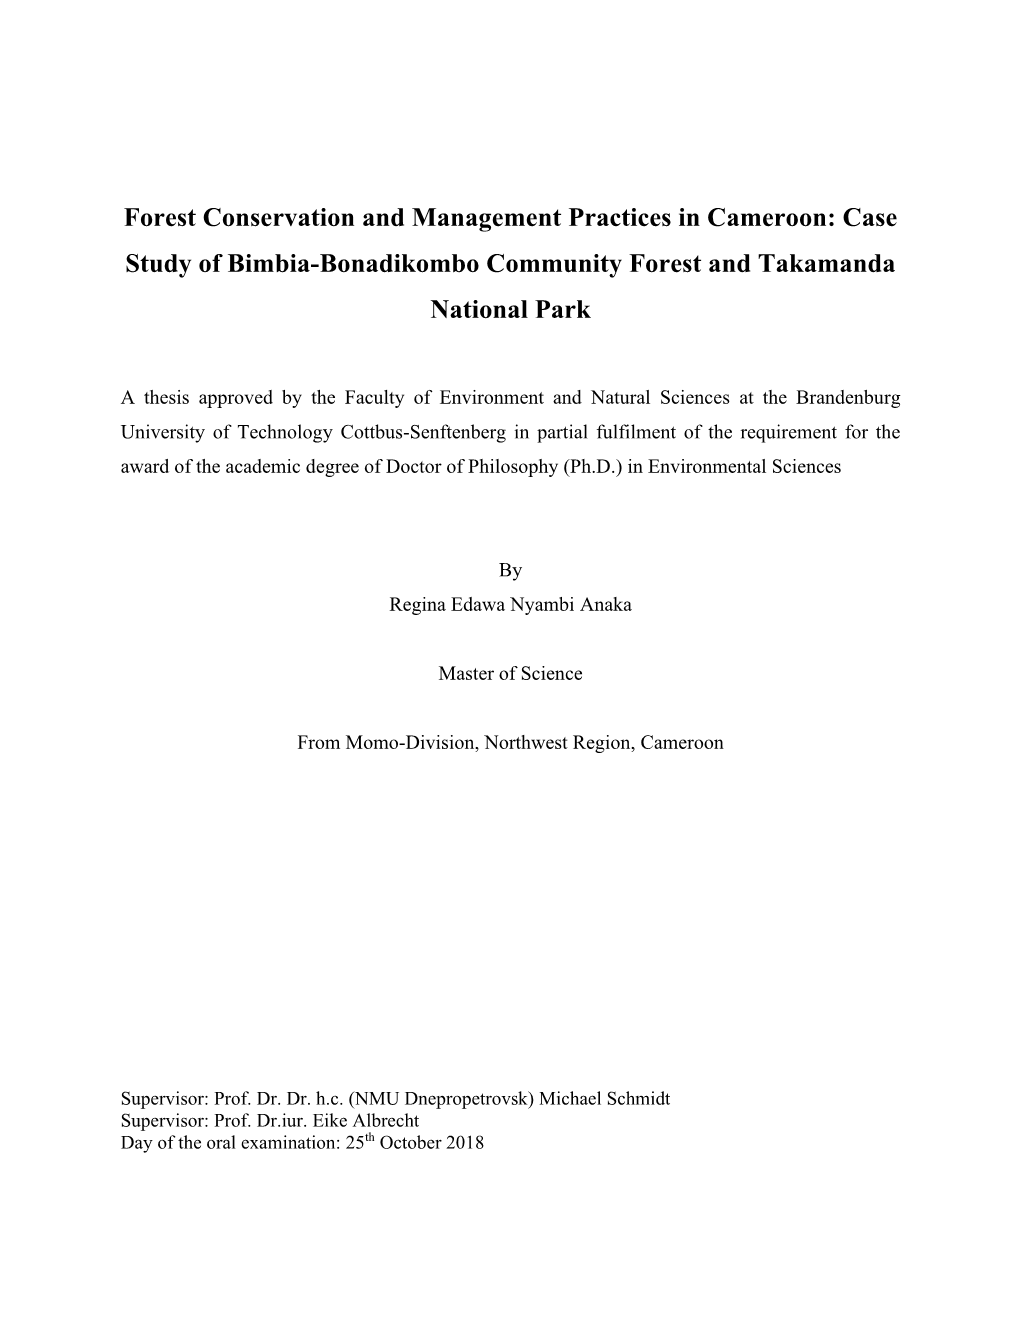 Forest Conservation and Management Practices in Cameroon: Case Study of Bimbia-Bonadikombo Community Forest and Takamanda National Park